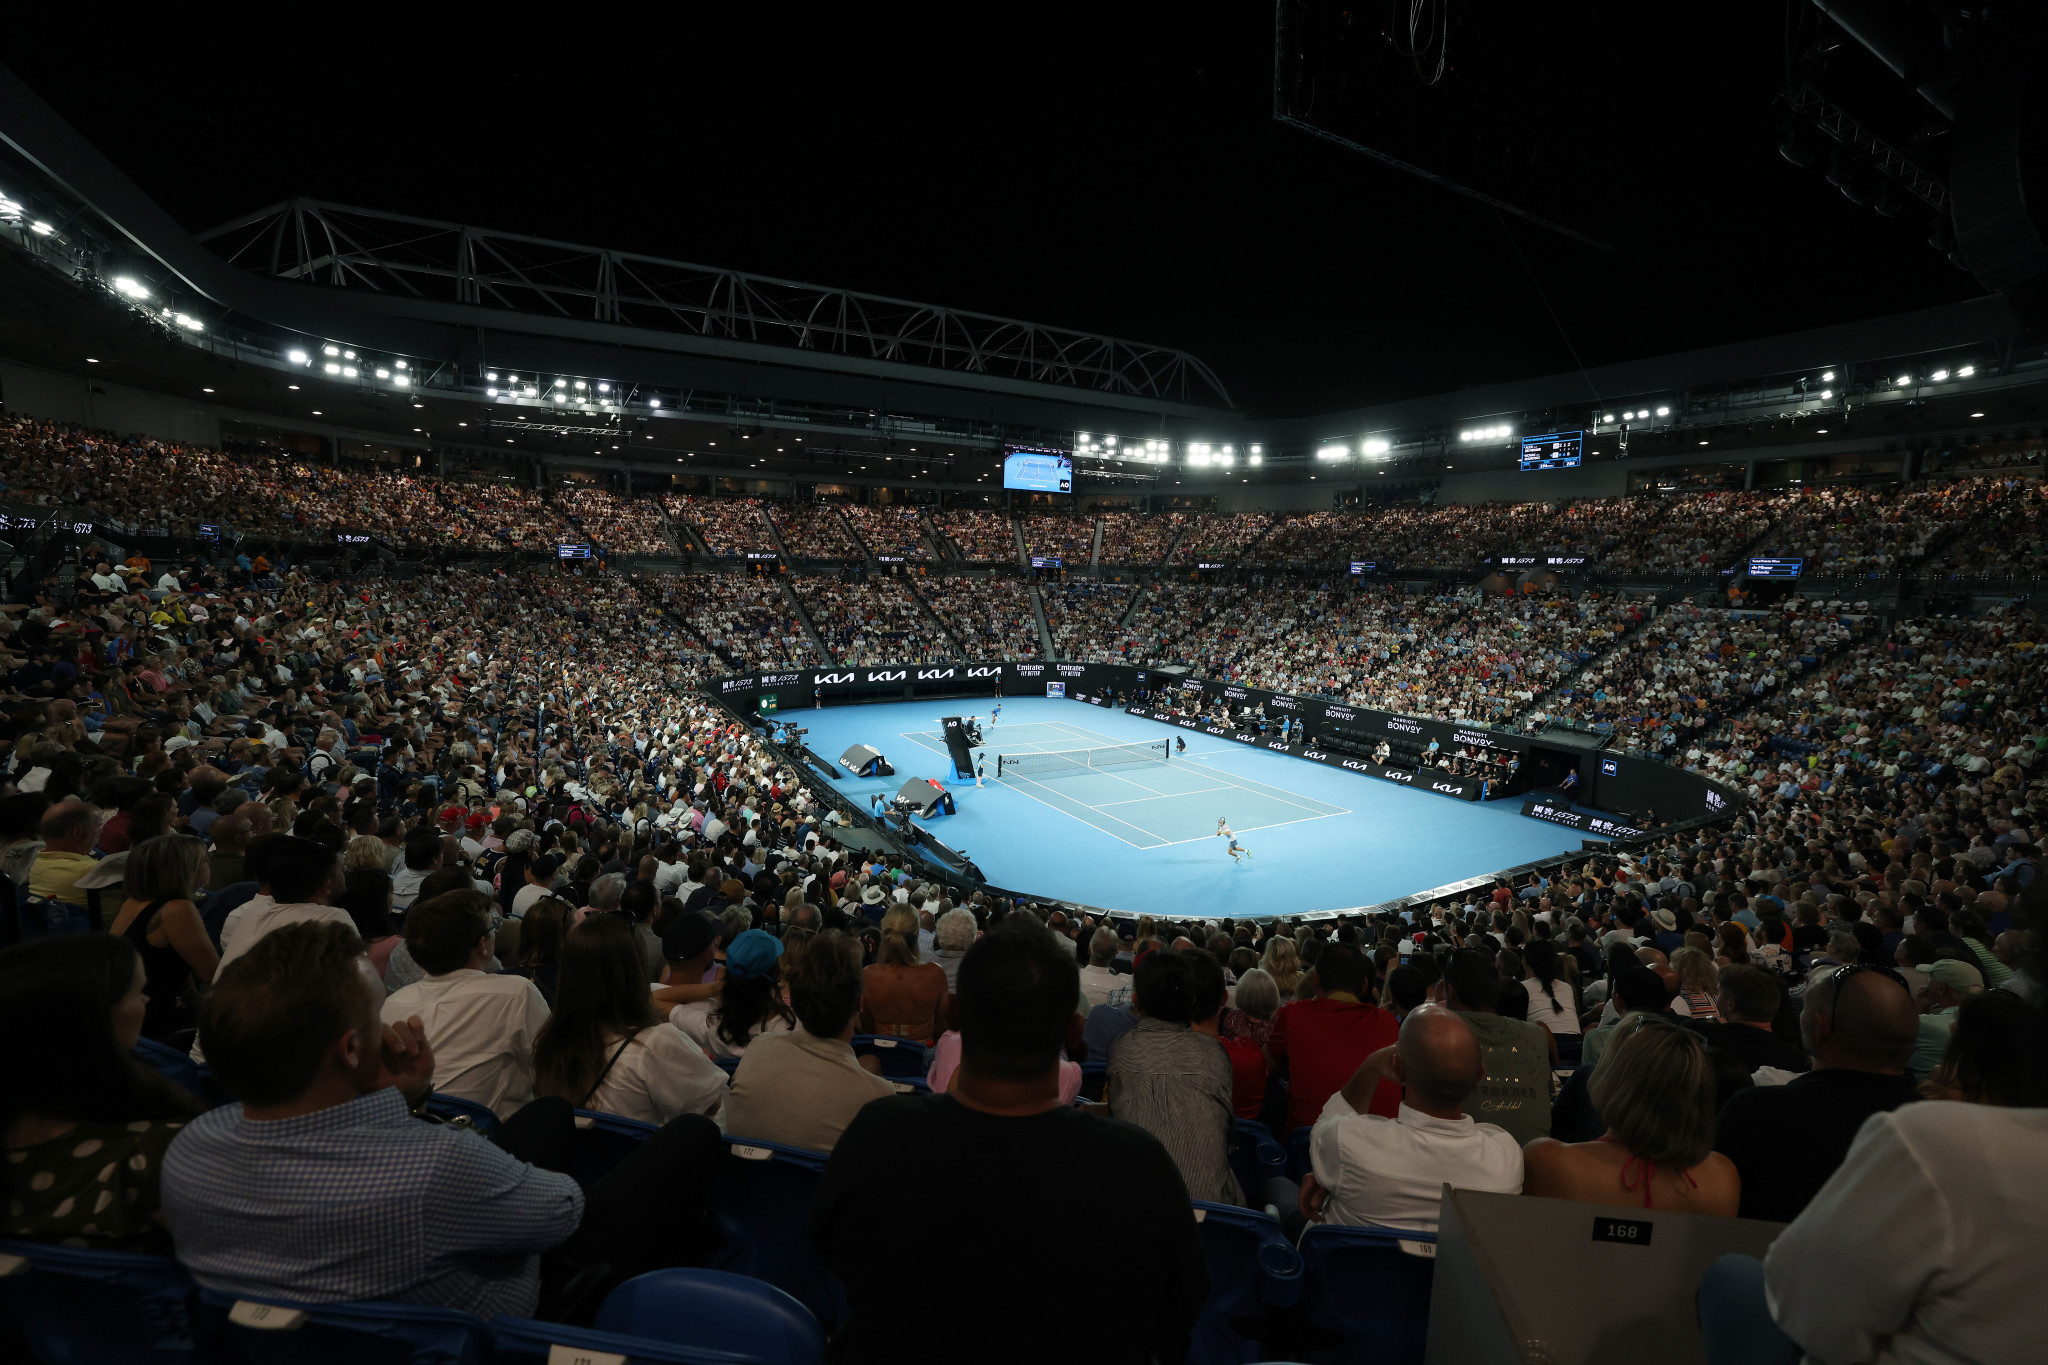 A capacity crowd enjoy the night session on the Rod Laver Arena, which featured Novak Djokovic in men's singles action, followed by a women's doubles match ©Getty Images